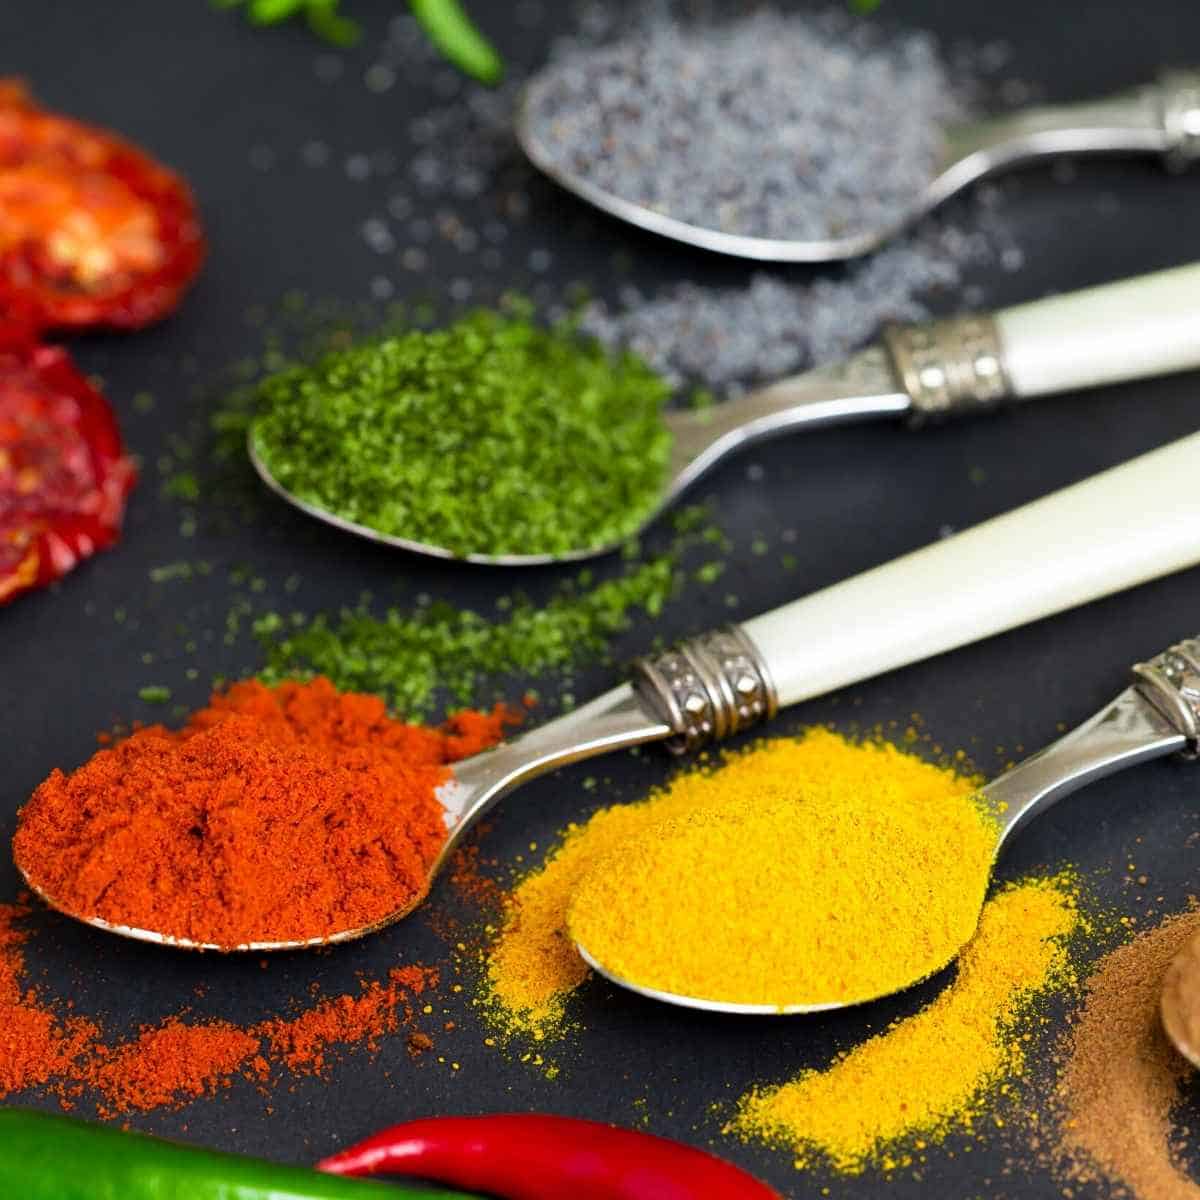 spoons filled with spices - 36 Herbs And Spices That Are Keto Friendly